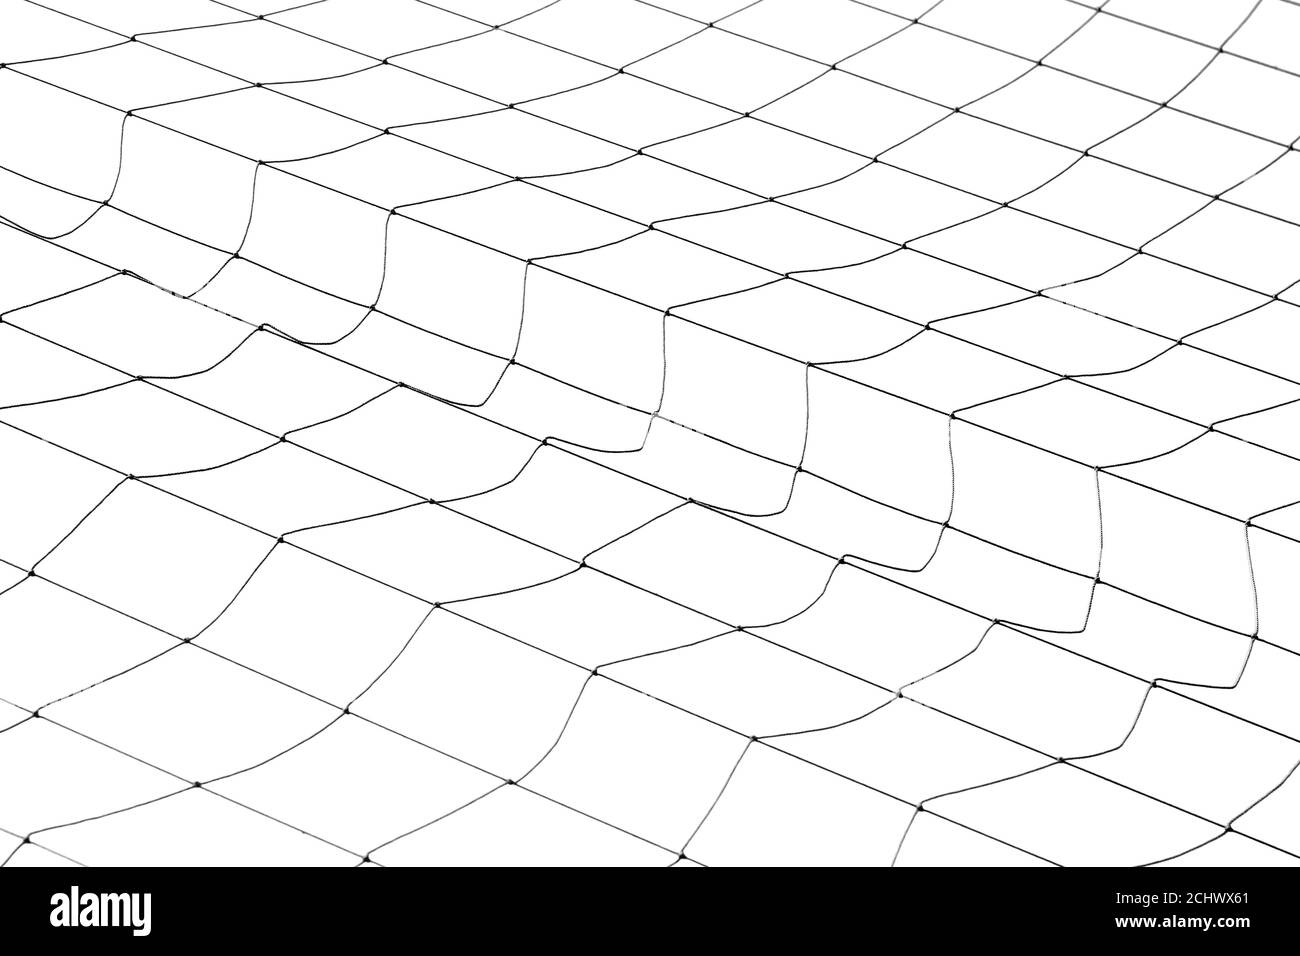 Fishing net black silhouette pattern isolated on white background Stock Photo